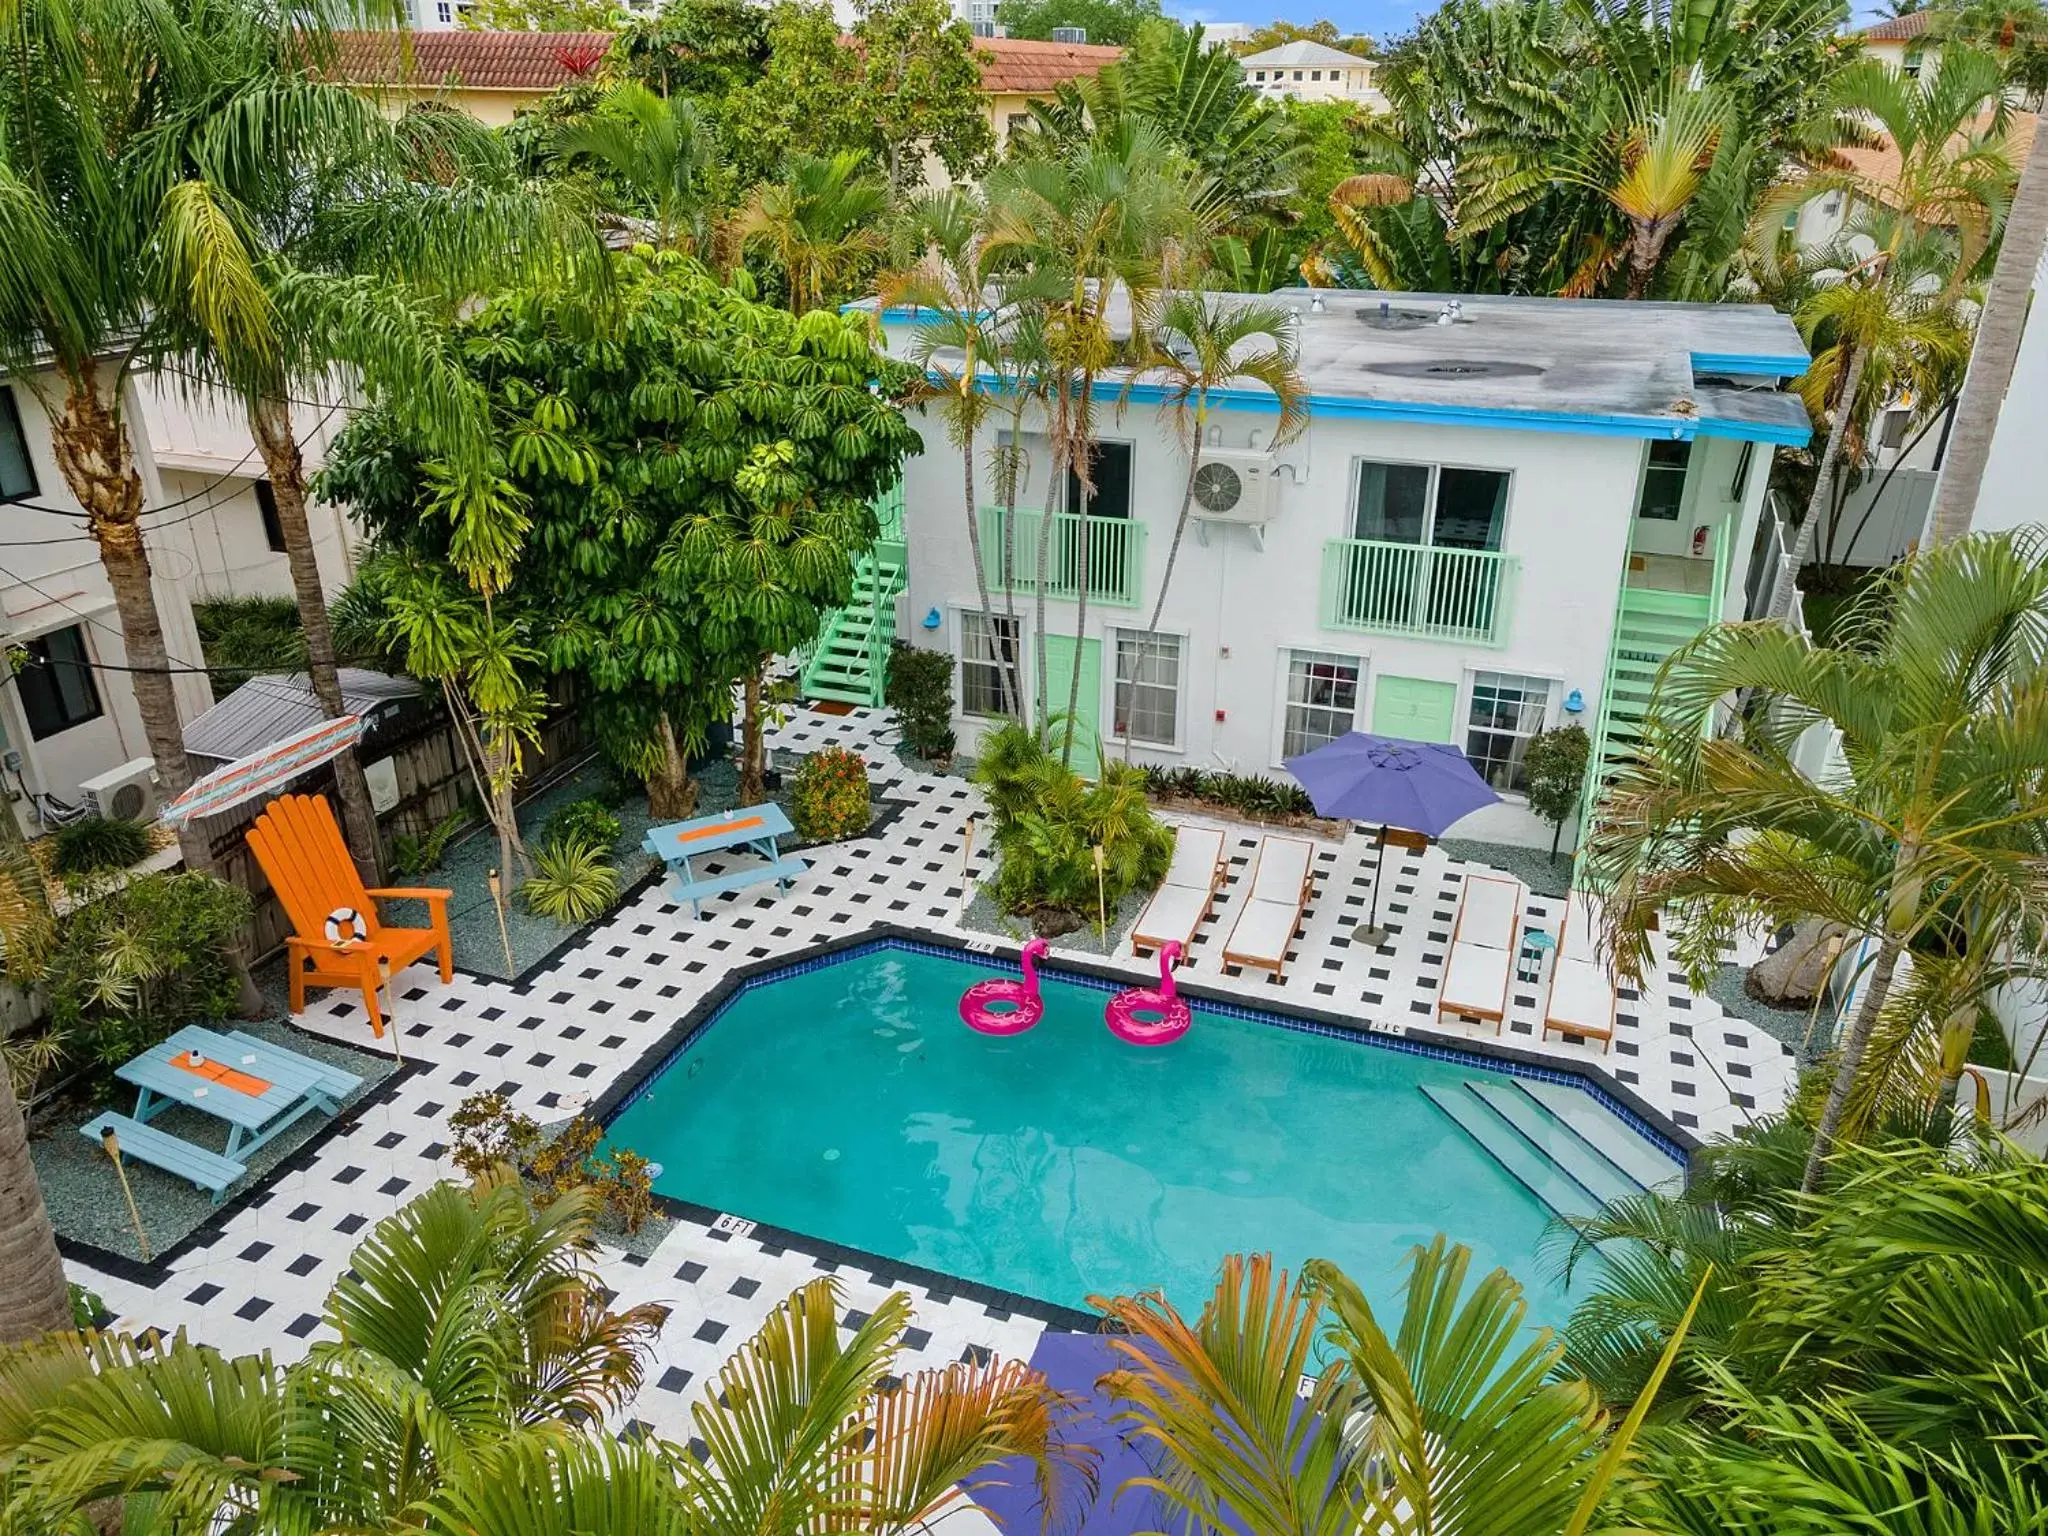 Property building, Pool View in Las Olas Guest House